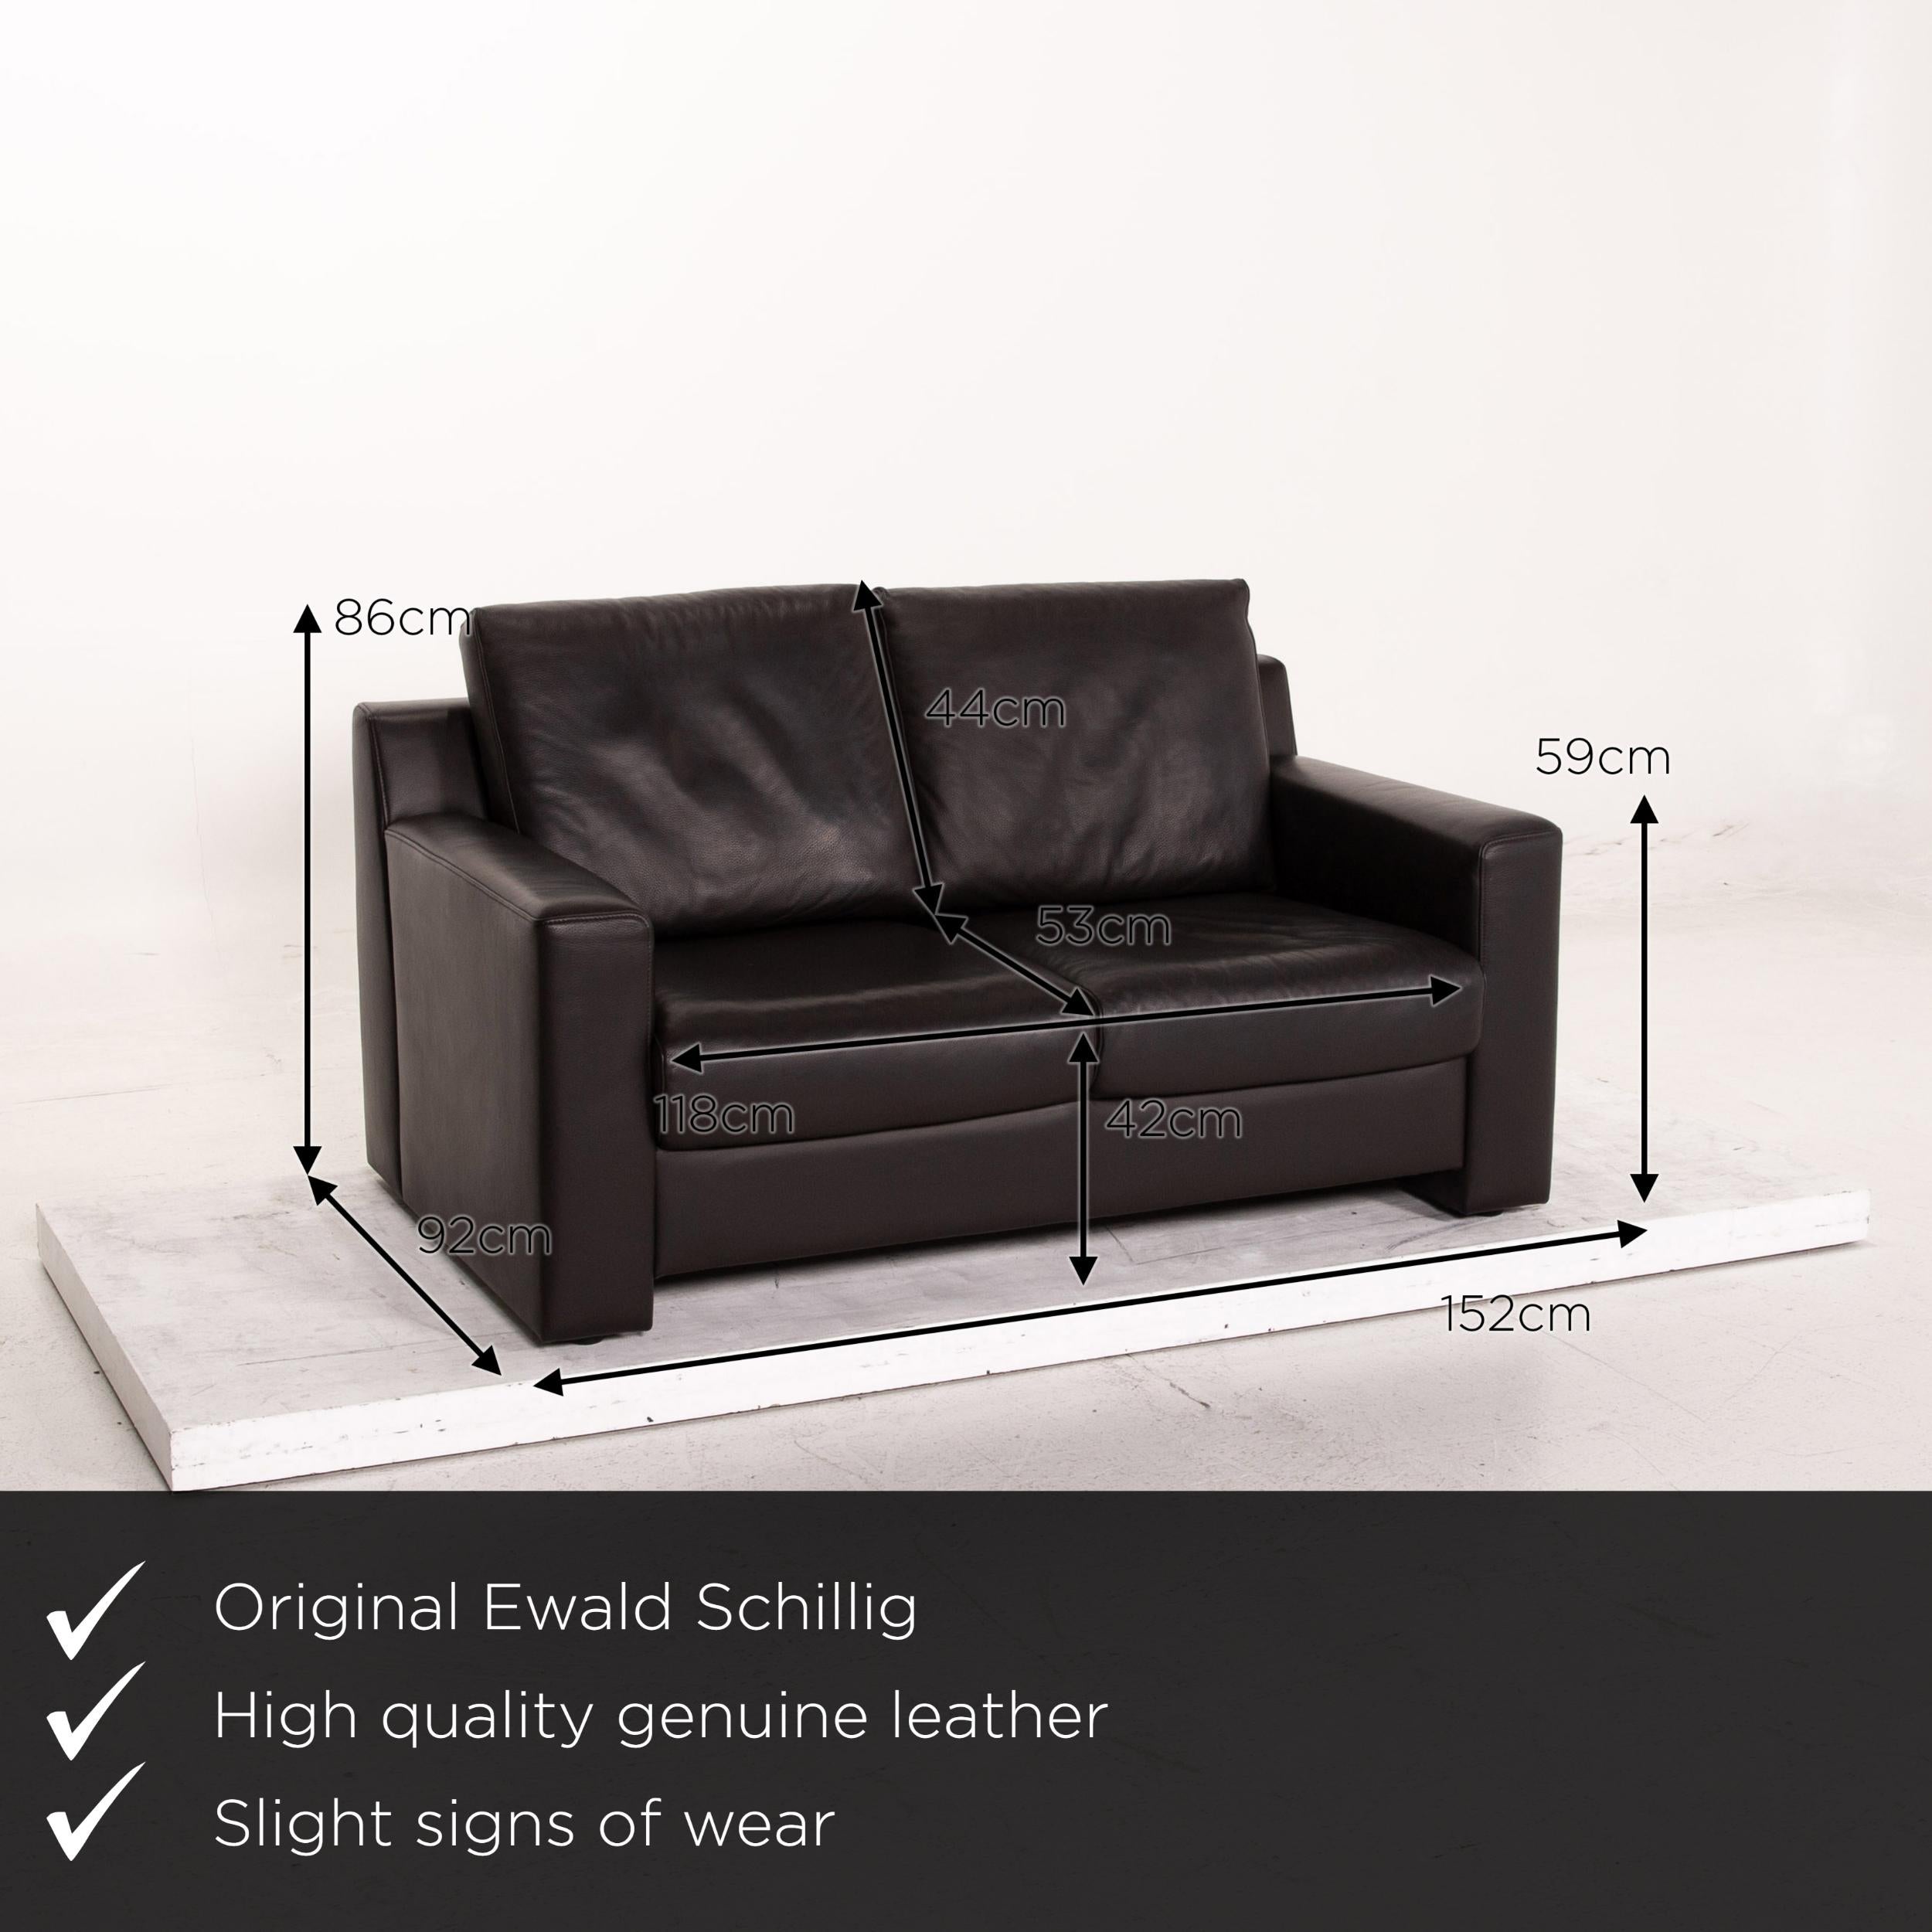 We present to you an Ewald Schillig Flex Plus leather sofa dark brown black brown two-seat couch.
 

 Product measurements in centimeters:
 

Depth 92
Width 152
Height 86
Seat height 42
Rest height 59
Seat depth 53
Seat width 118
Back